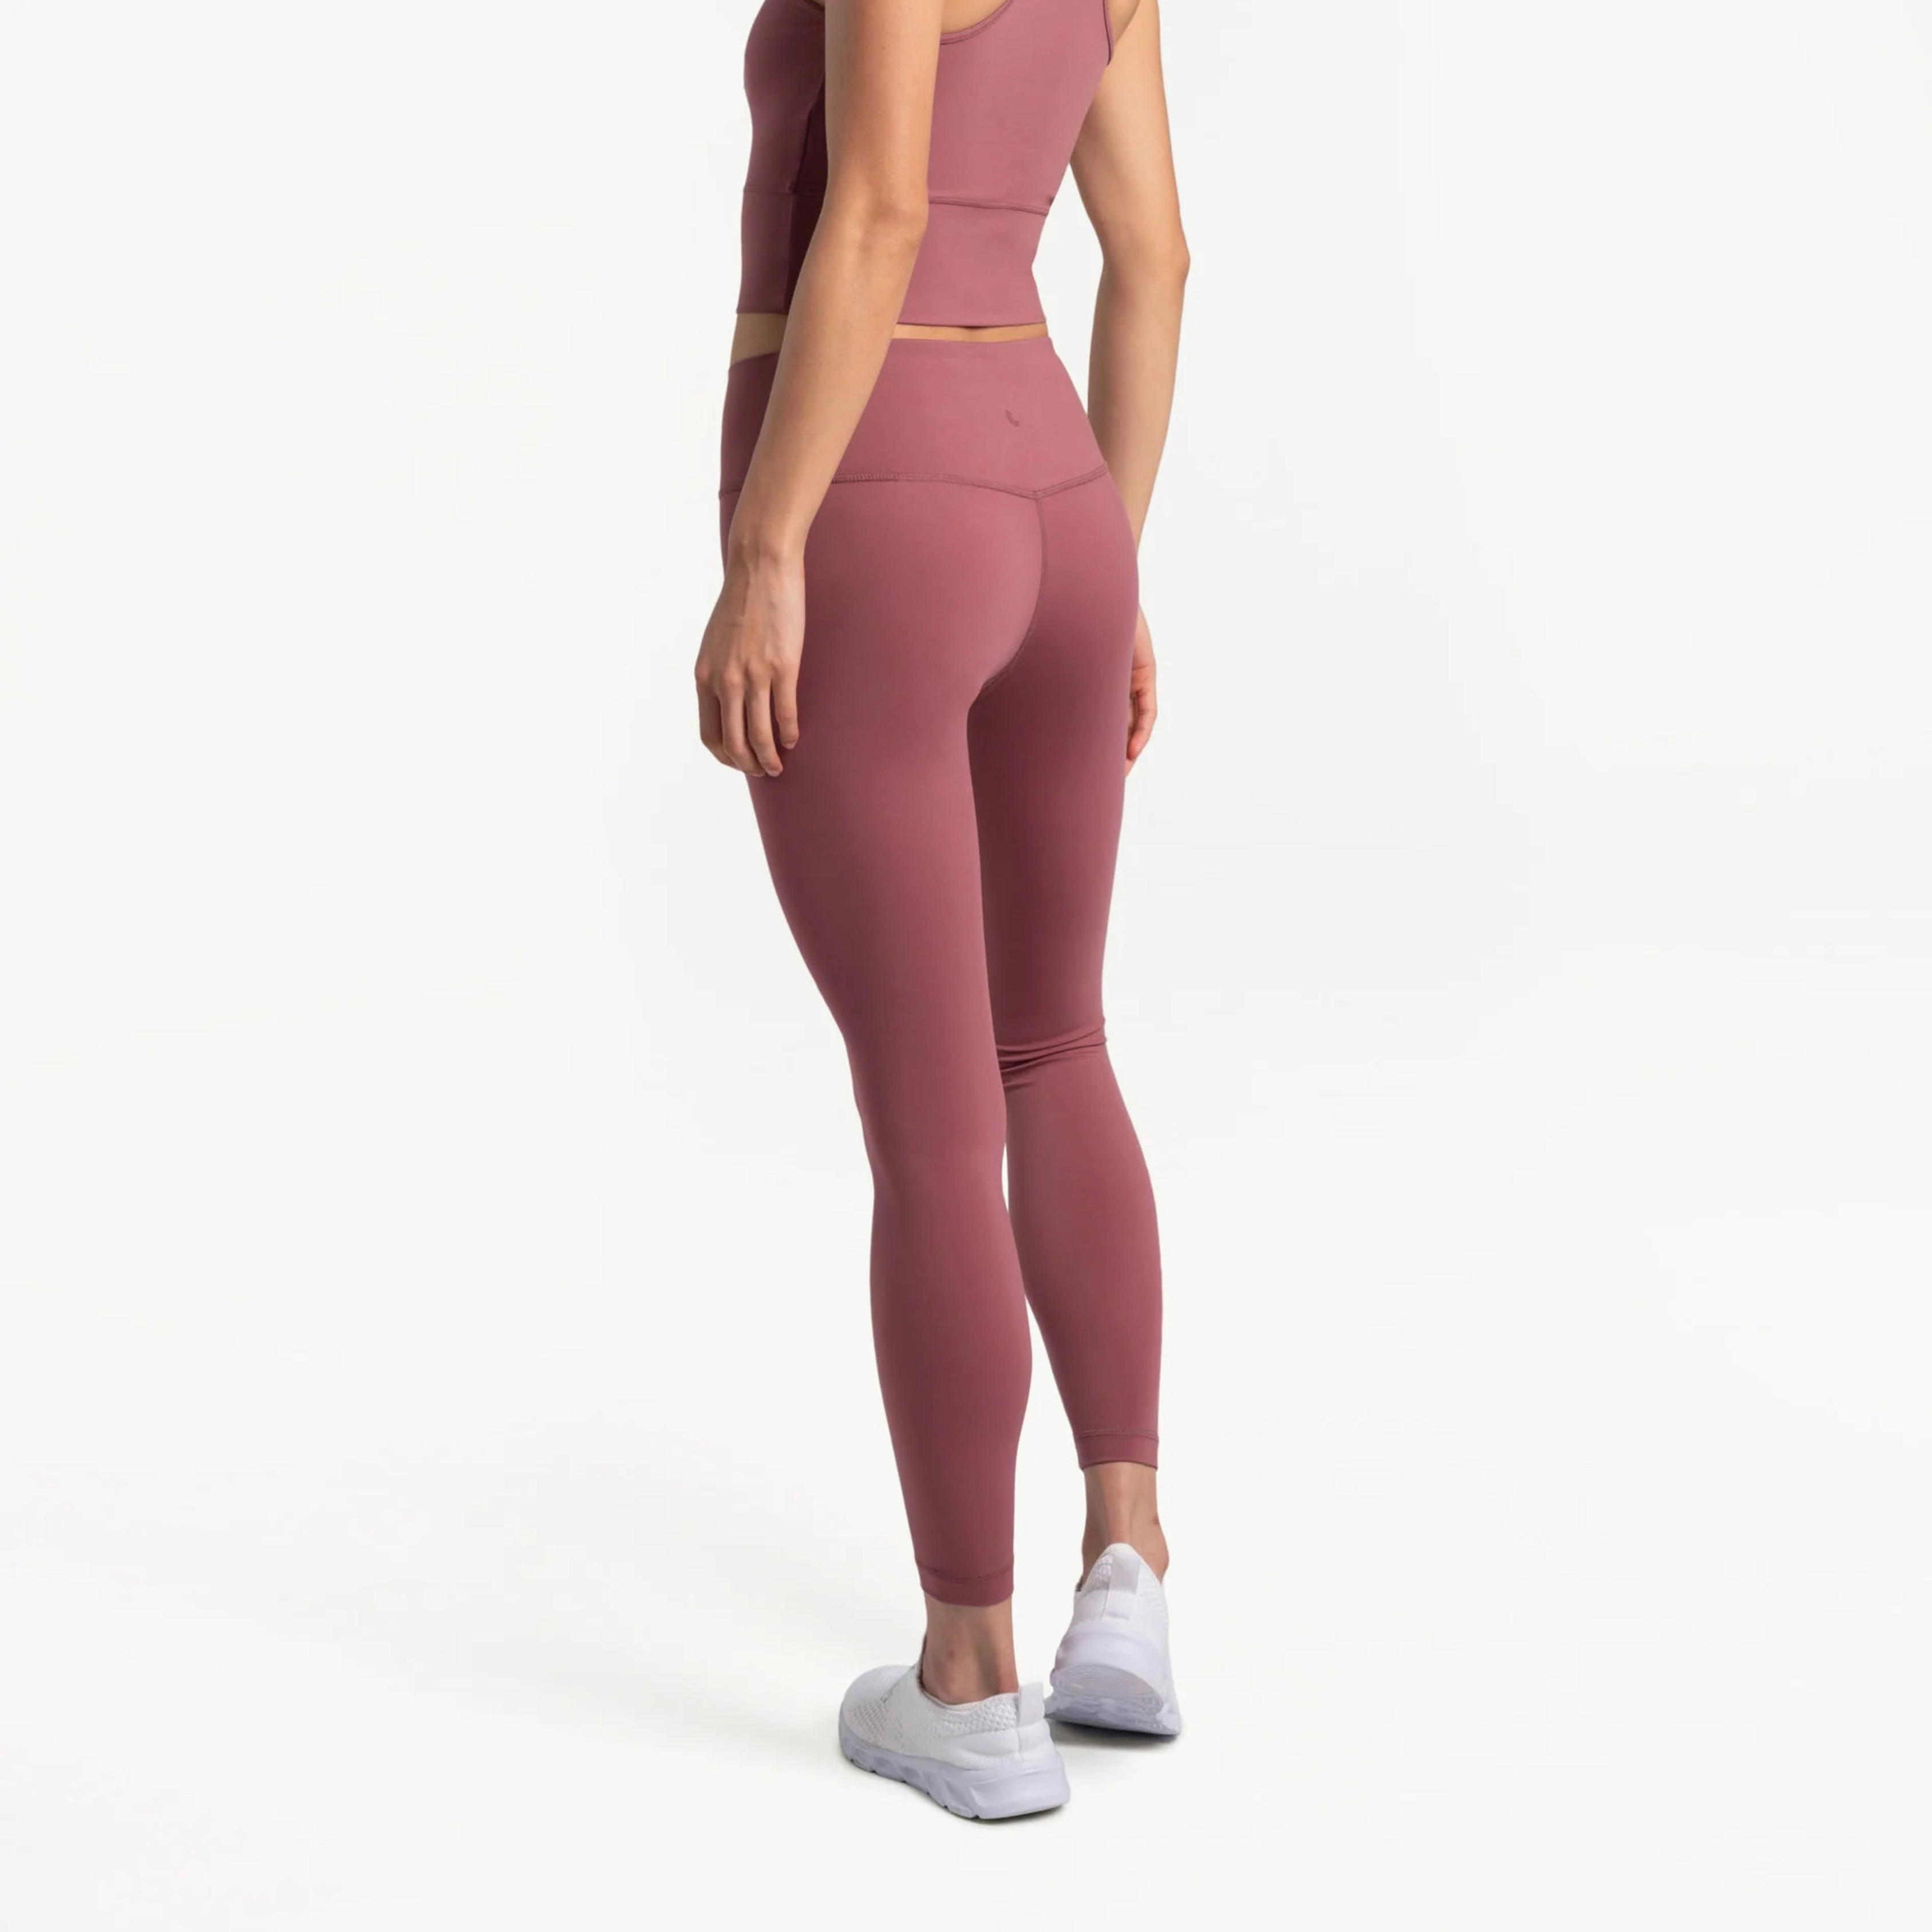 NYT Wirecutter Deals on X: Our cheap and surprisingly soft leggings pick,  the IUGA High Waist Yoga Pants 🦵🧘‍♀️ are back down to $20 in select  colors (from $24)  Buy:  /